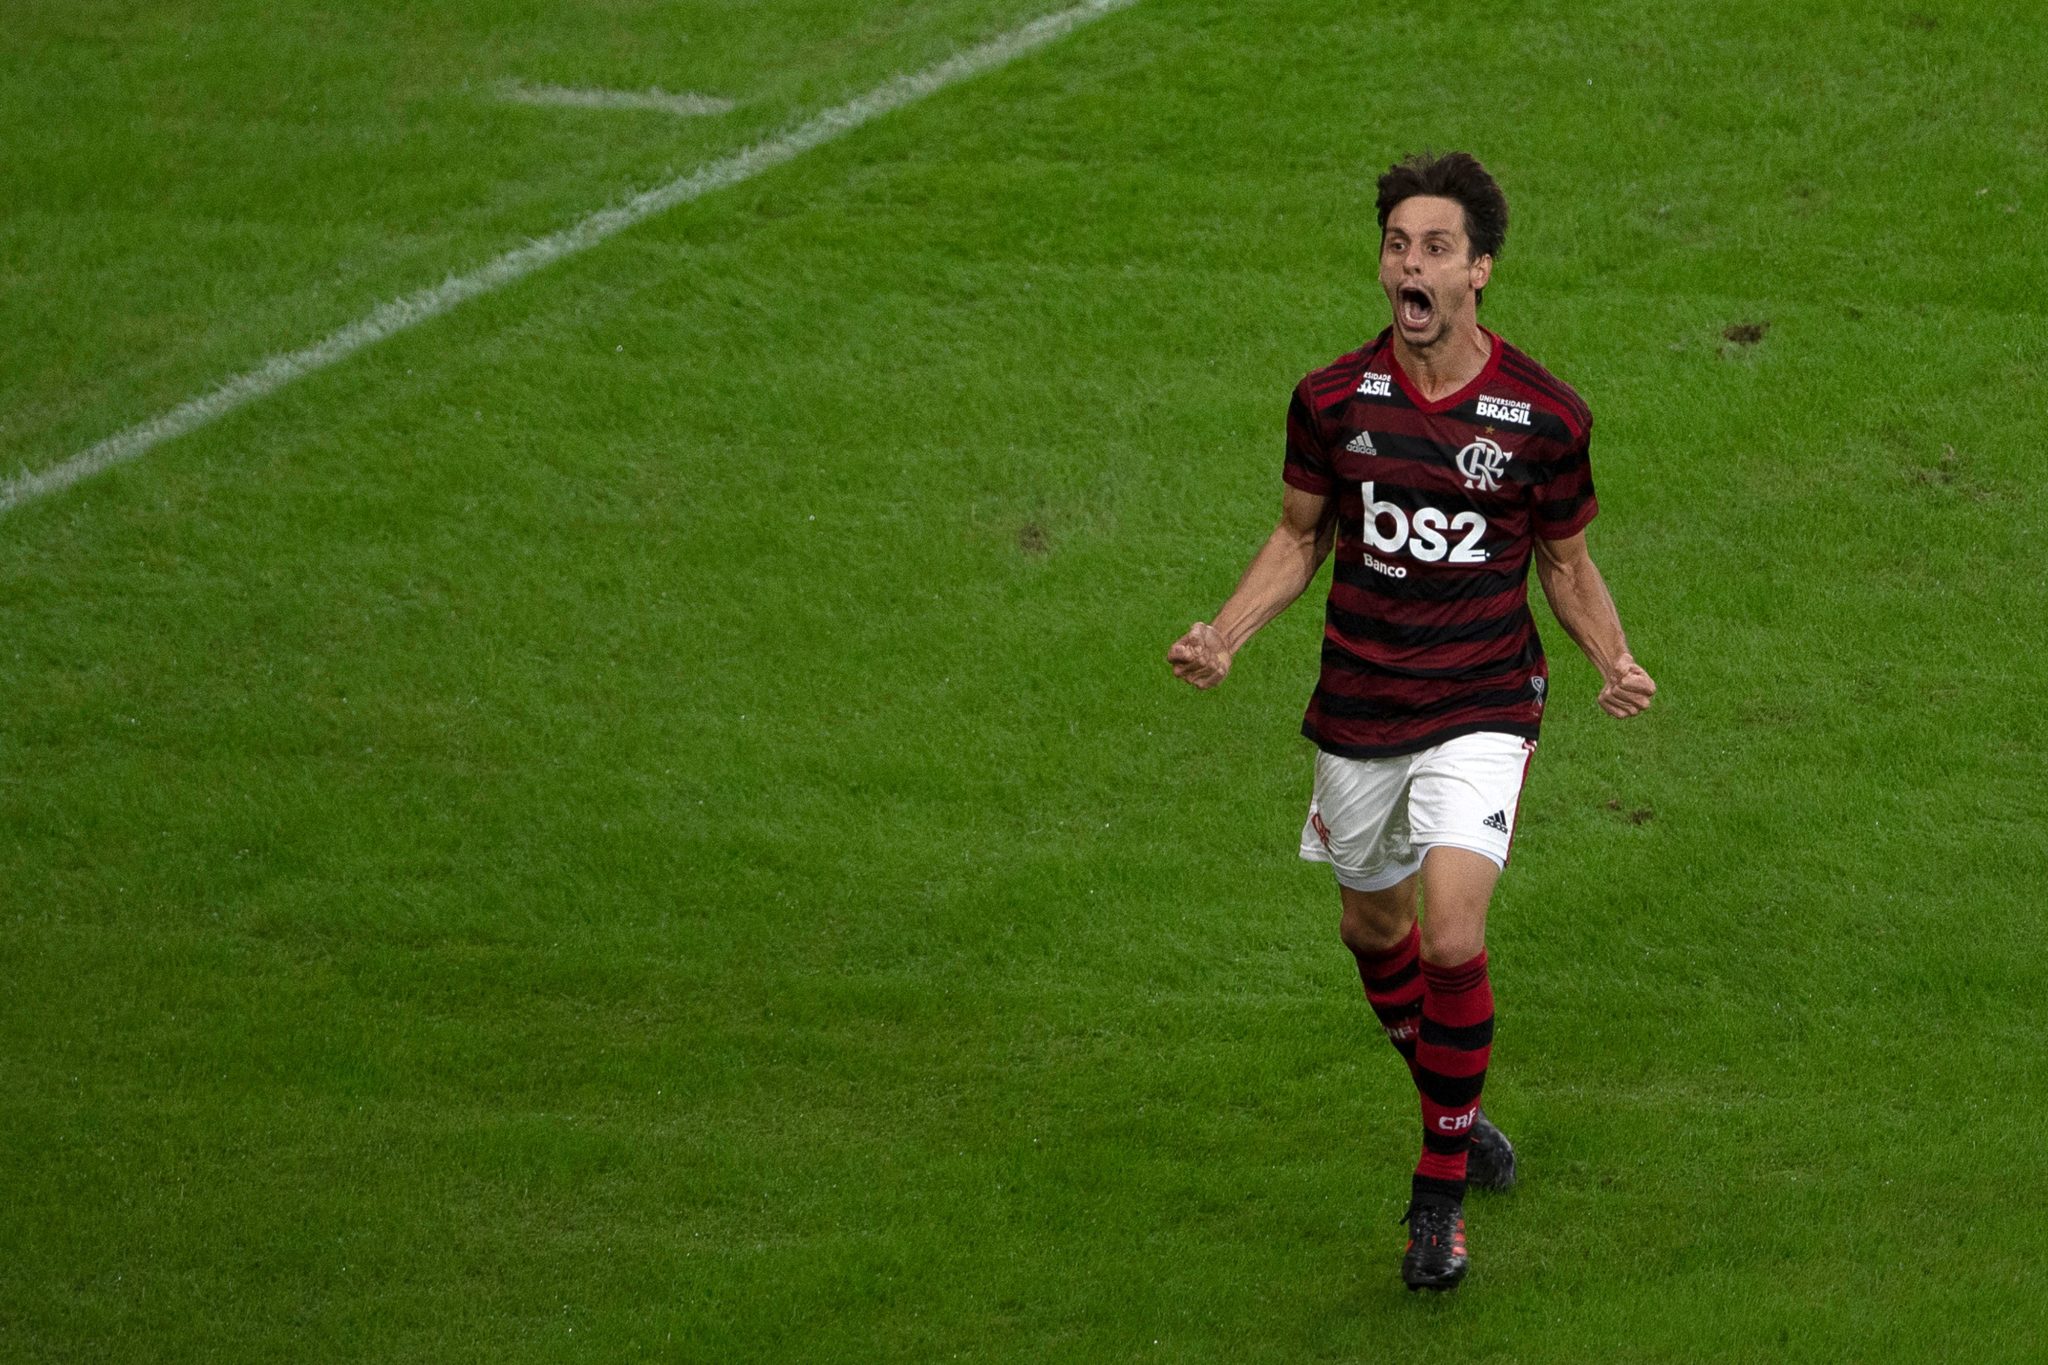 Brazil's Flamengo Rodrigo Caio celebrates with his teammates his goal that gave the victory to Flamengo during Copa do Brasil 2019 football match between Brazil's Flamengo and Brazil's Corinthians at Maracana stadium in Rio de Janeiro, Brazil, on June 4, 2019. (Photo by MAURO PIMENTEL / AFP)        (Photo credit should read MAURO PIMENTEL/AFP via Getty Images)